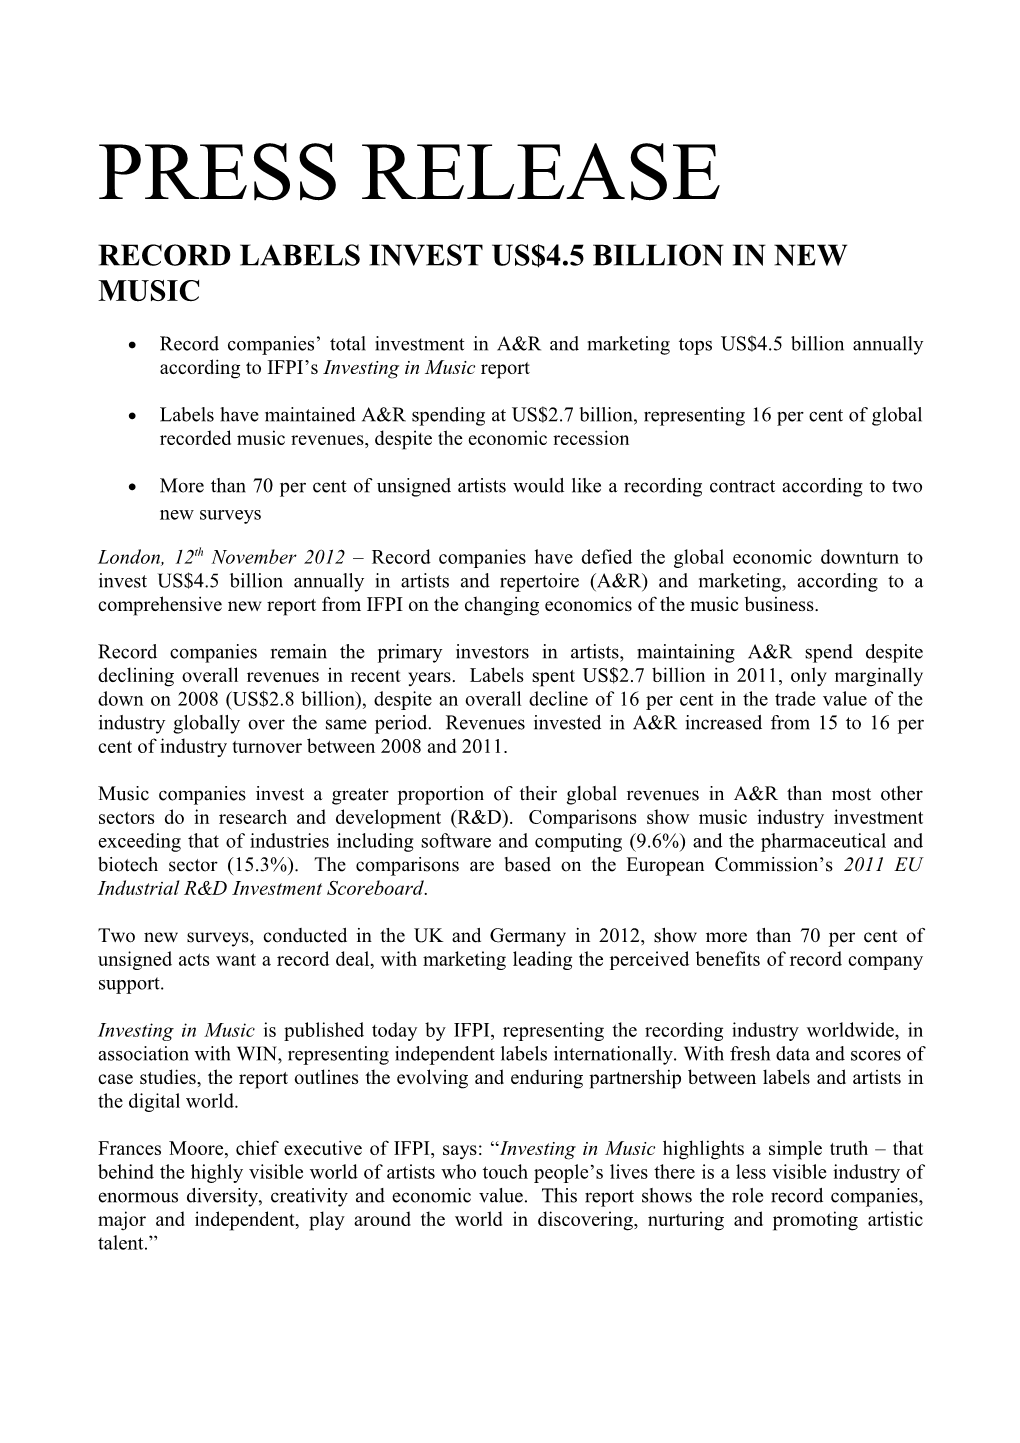 Record Labels Invest Us$4.5 Billion in New Music